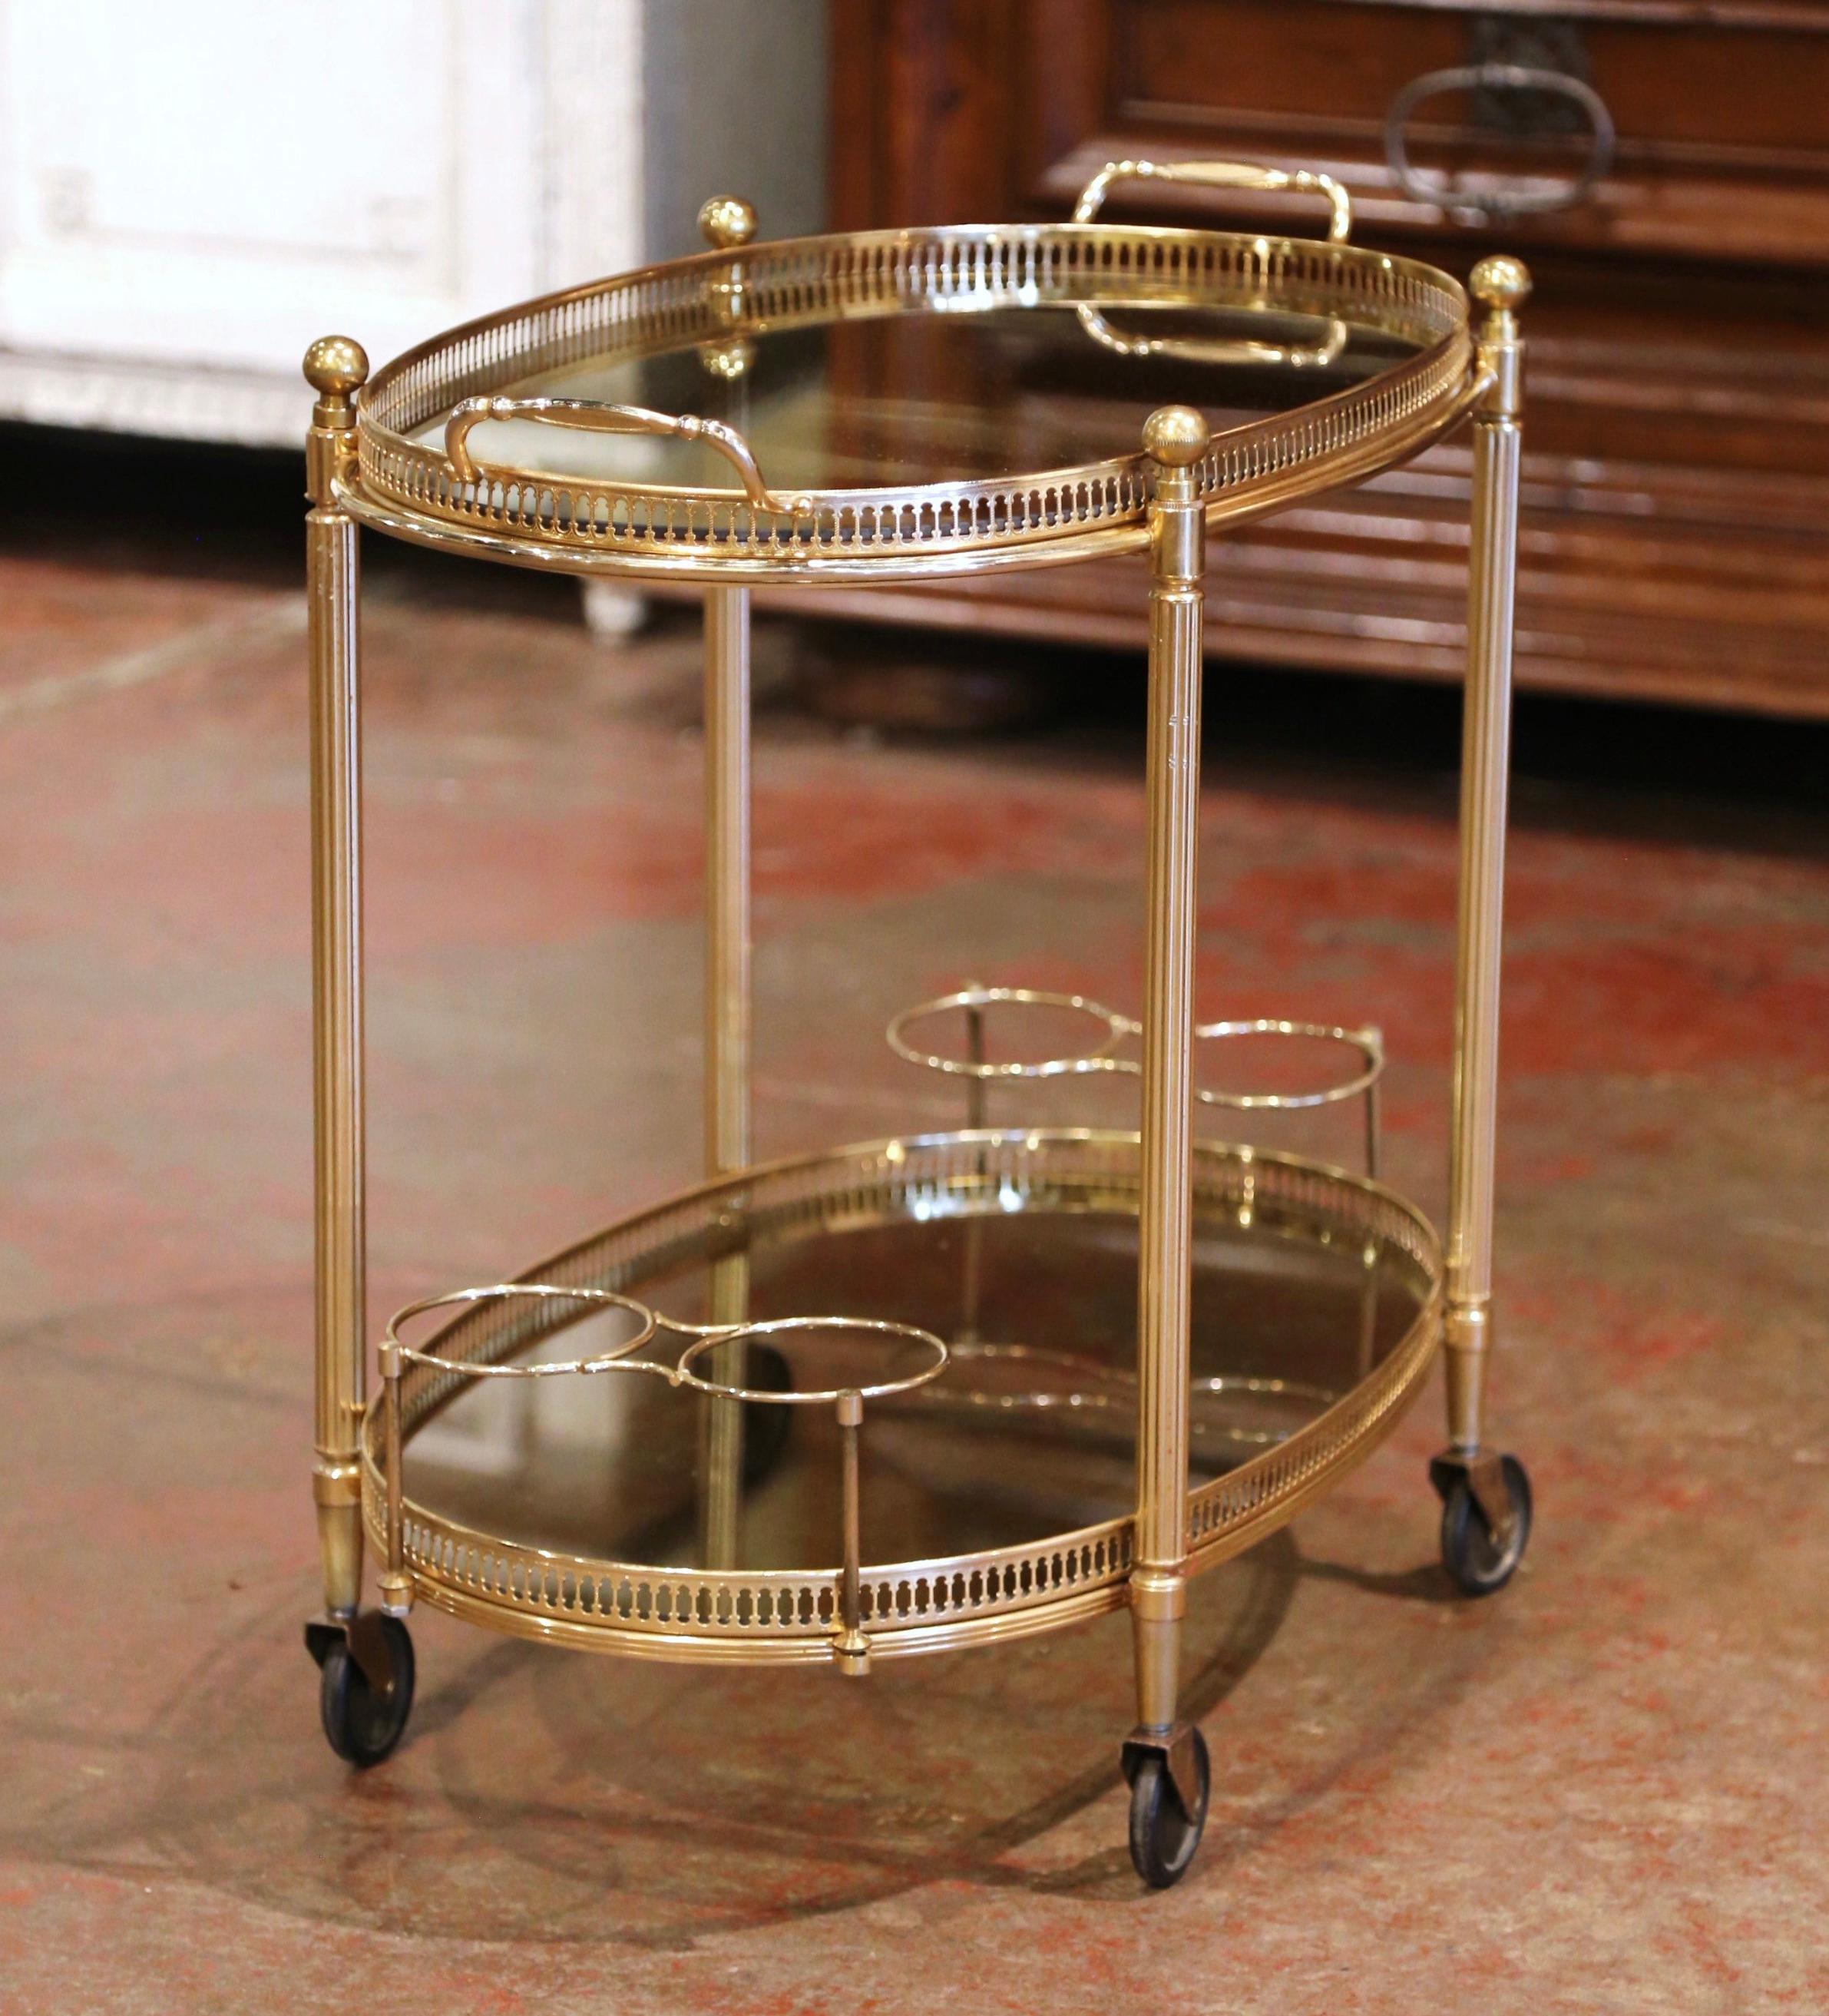 Midcentury French Polished Brass Dessert Table or Bar Cart on Wheels 1